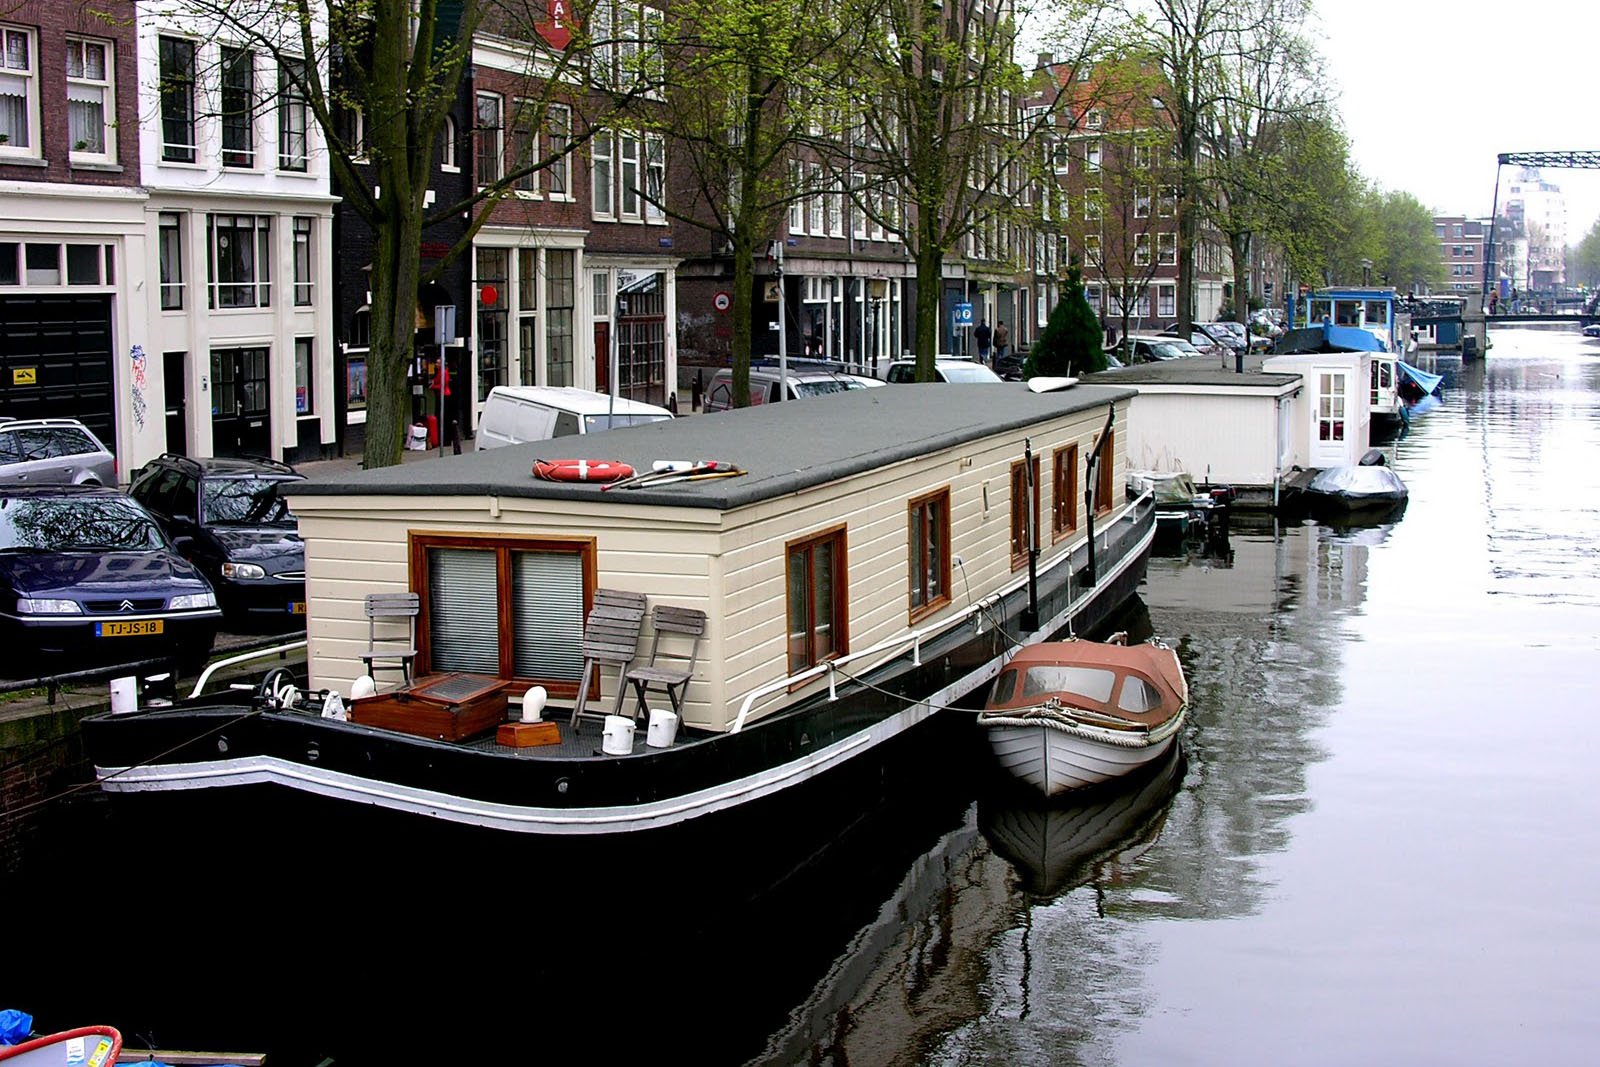 How to spend a night in a houseboat in Amsterdam